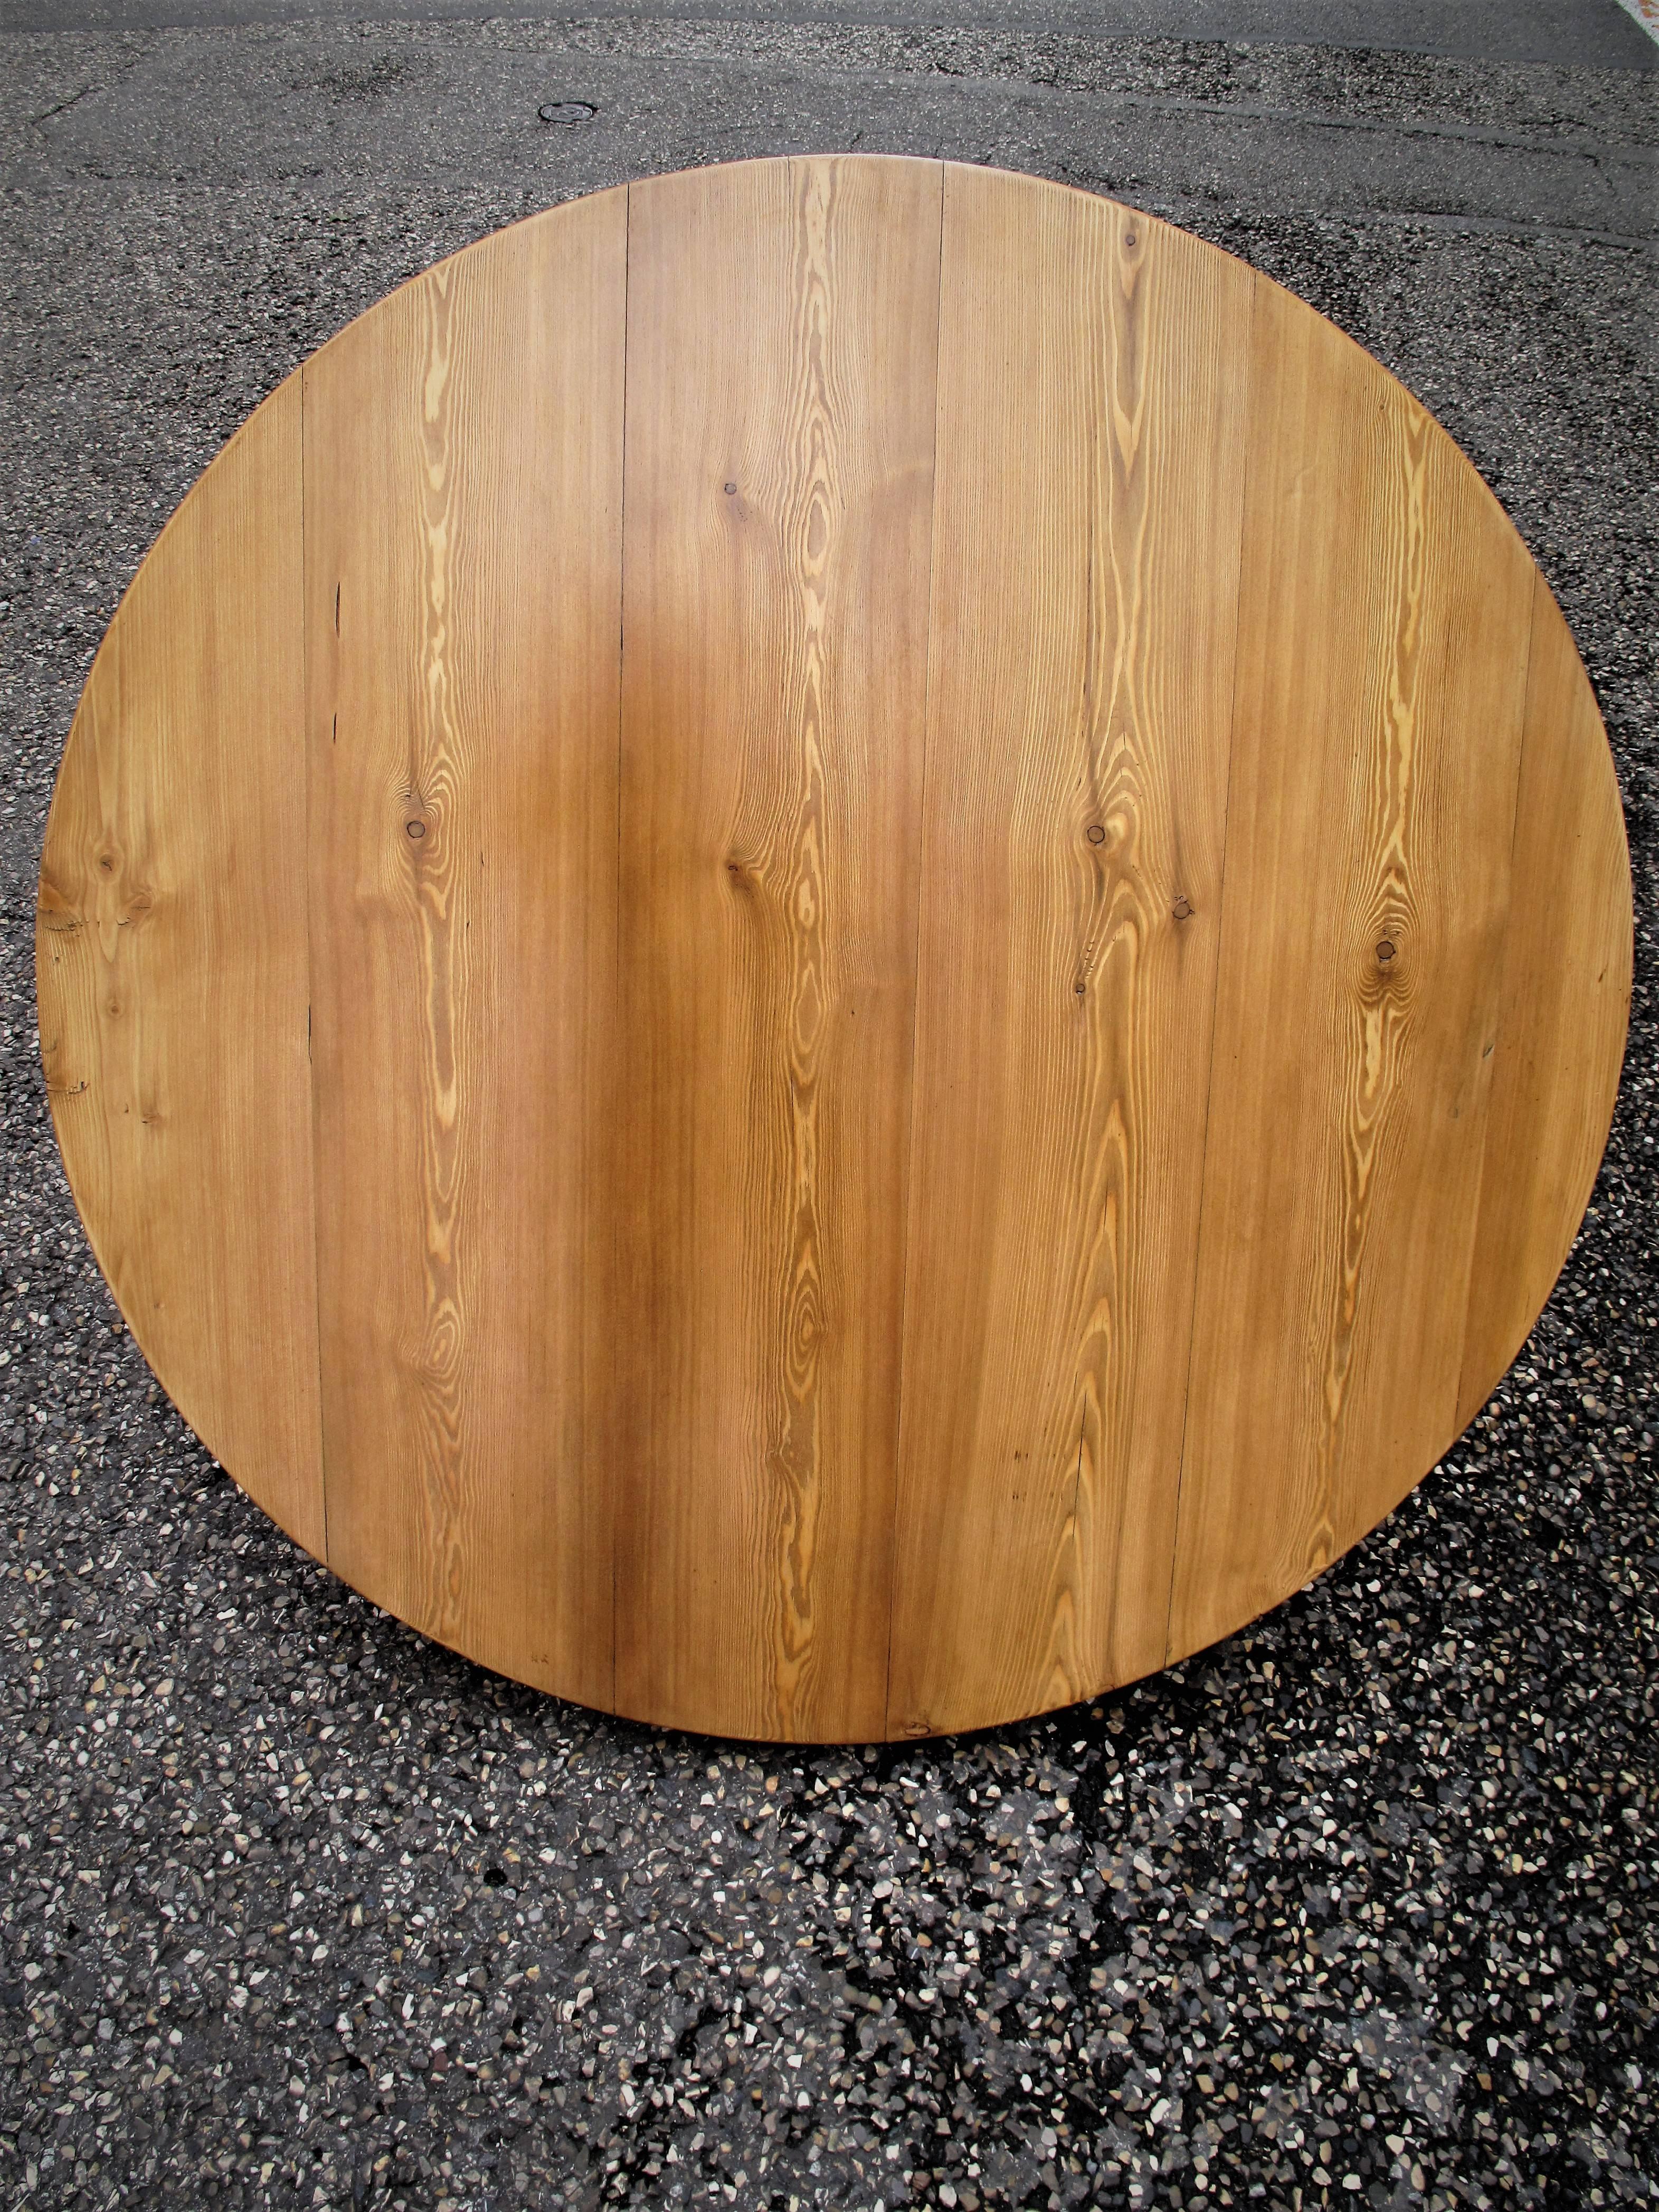 Harlotte Perriand Larch Table from Meribel Les Allues Ski Resort, 1950 In Good Condition In Grenoble, FR